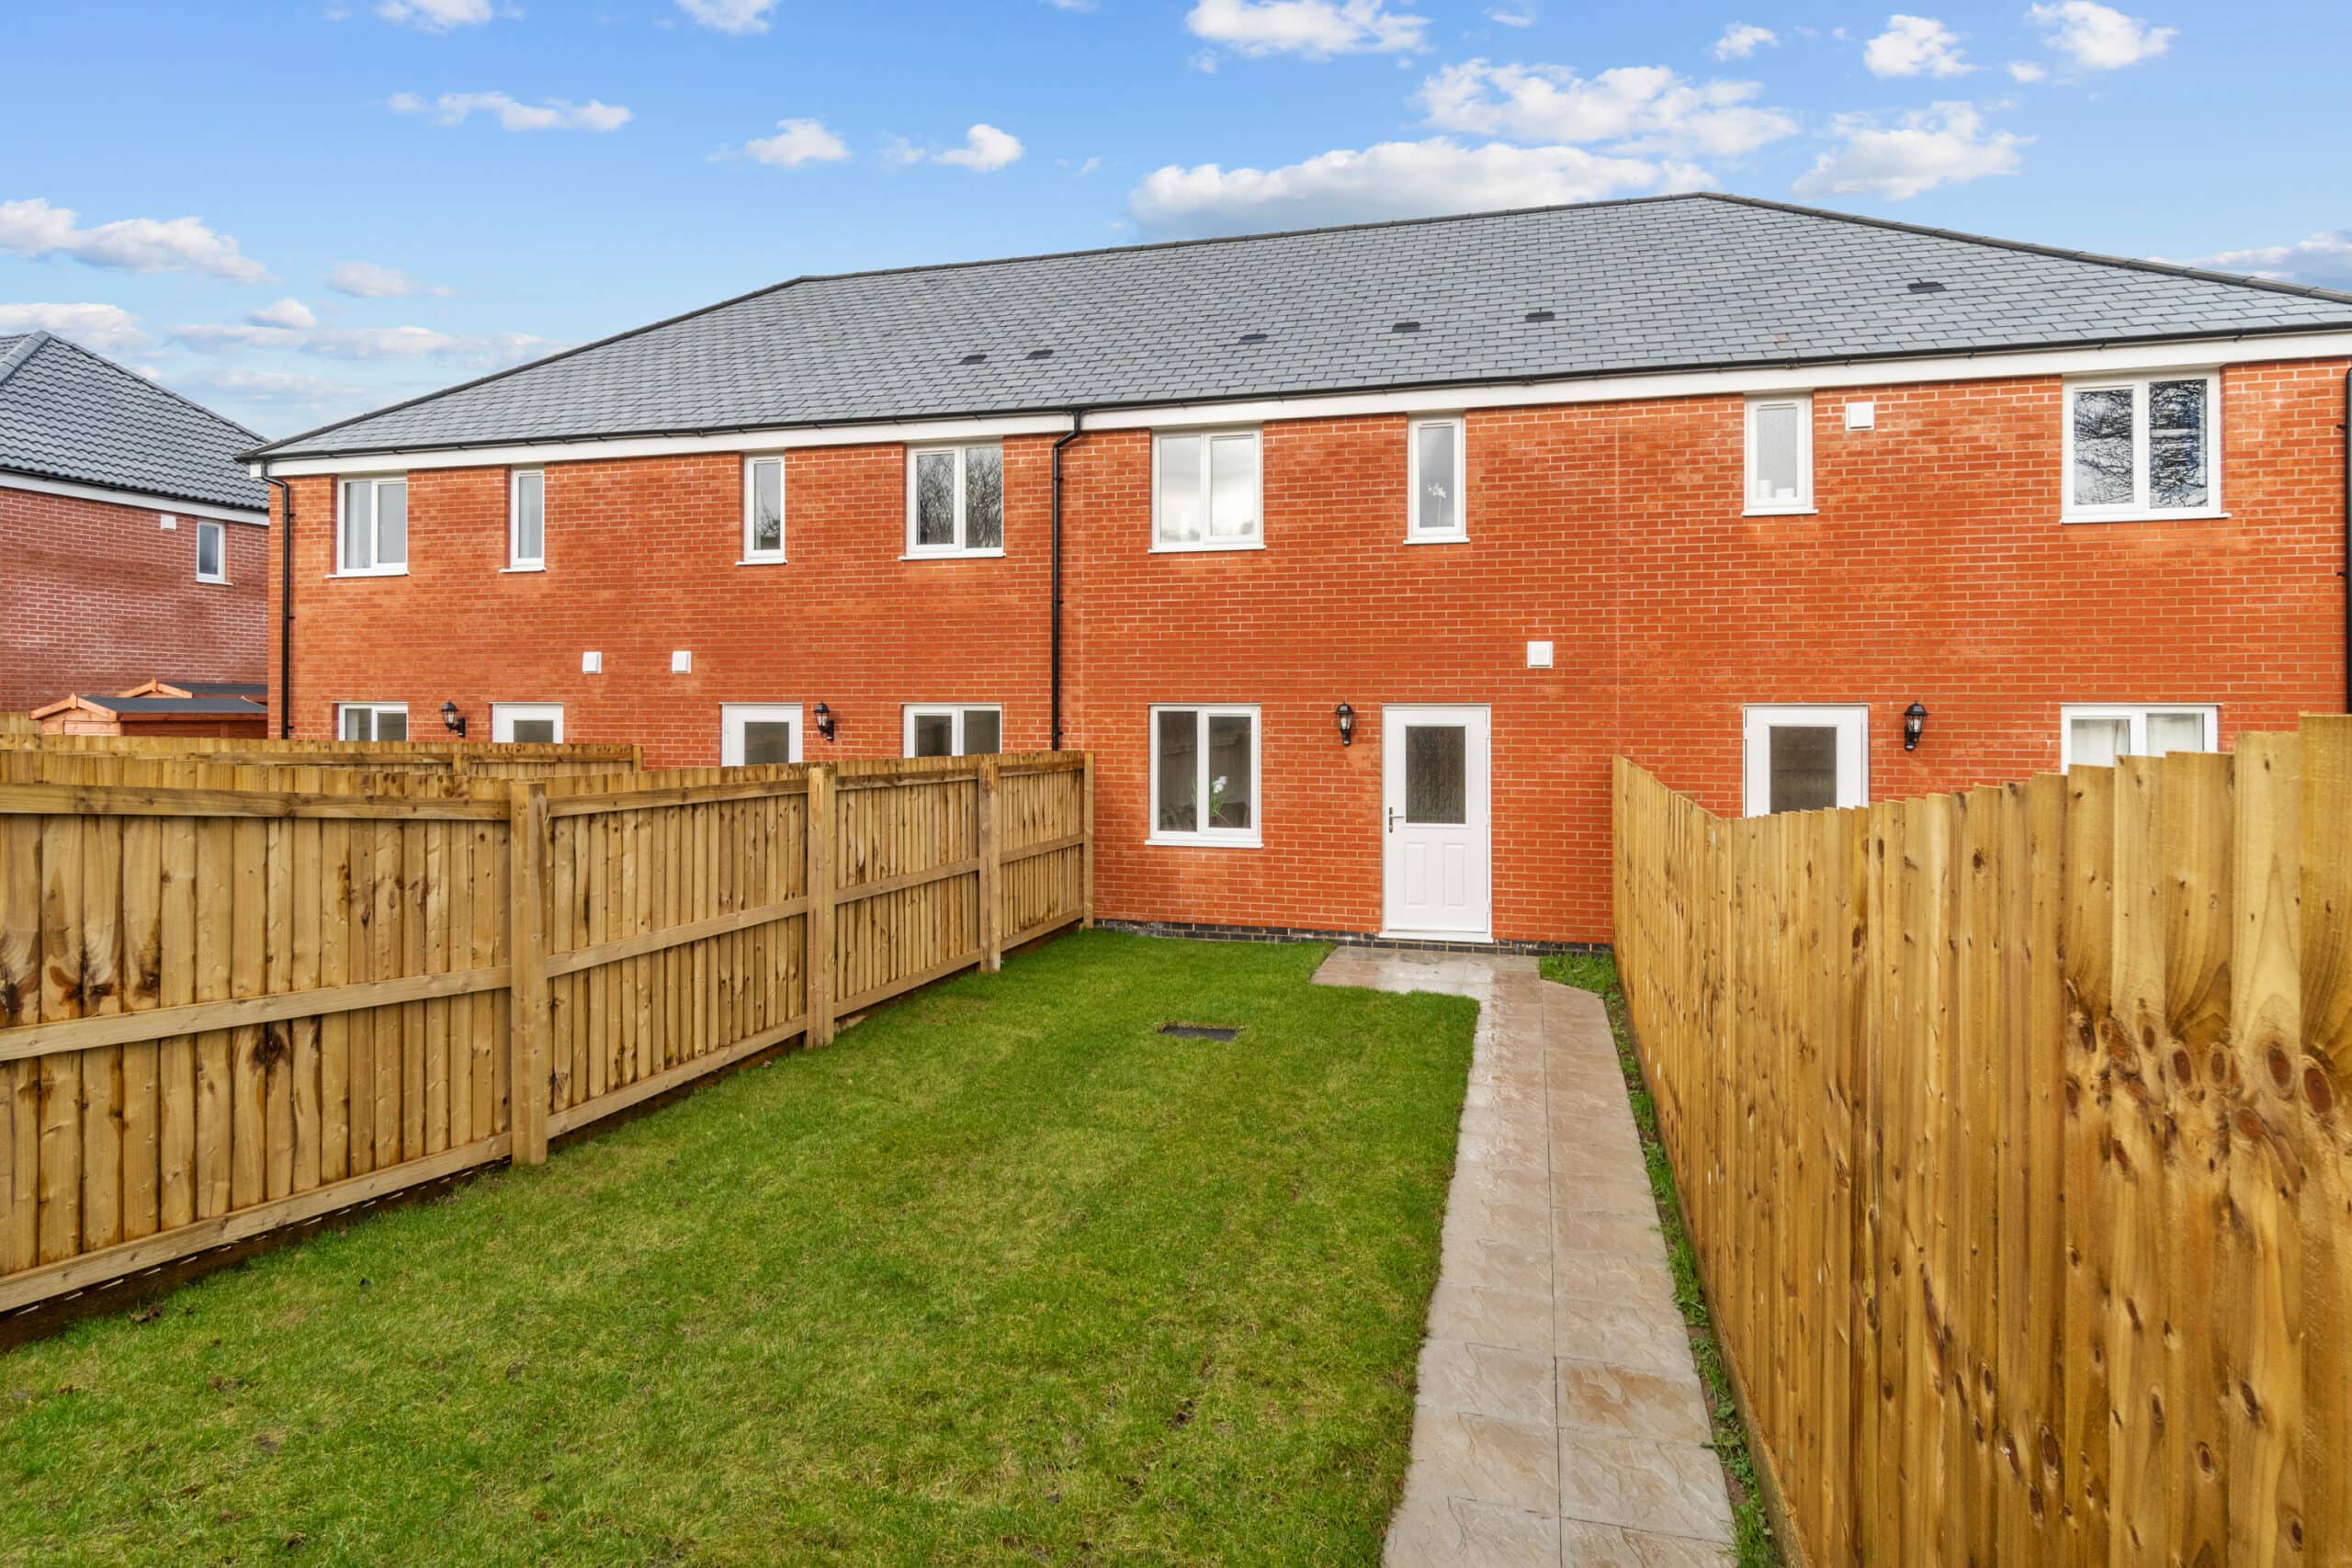 Image of a garden at Trevethan Meadows from LiveWest - available to purchase through Shared Ownership on Share to Buy!